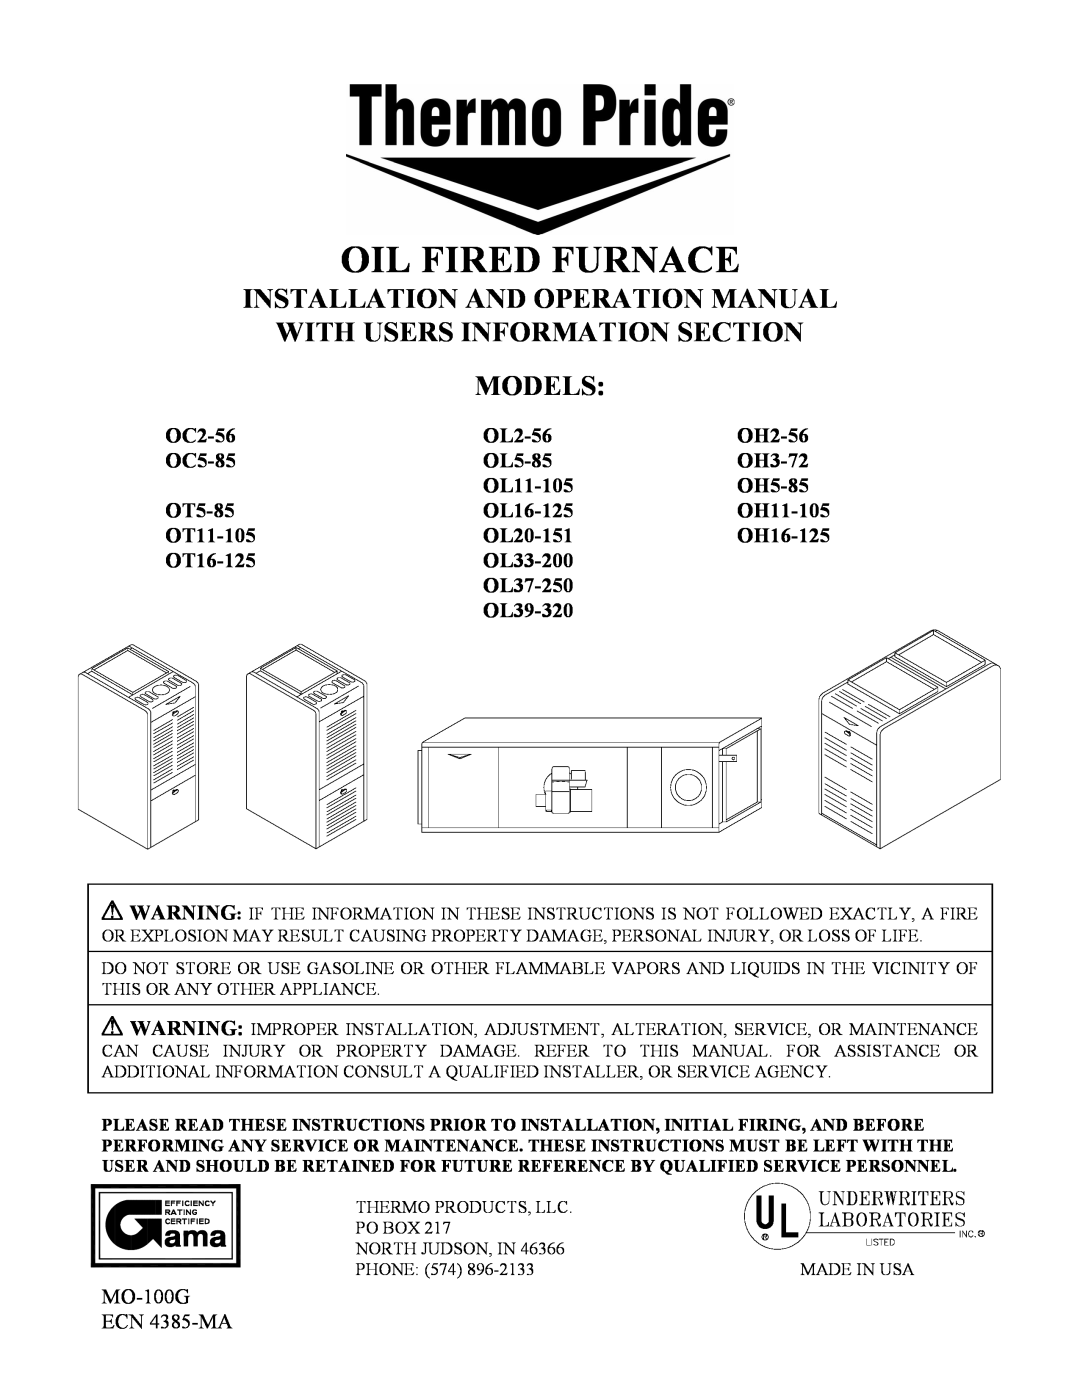 Thermo Products OH2-56, OT5-85, OH16-125, OL16-125 operation manual Oil Fired Furnace, With Users Information Section Models 